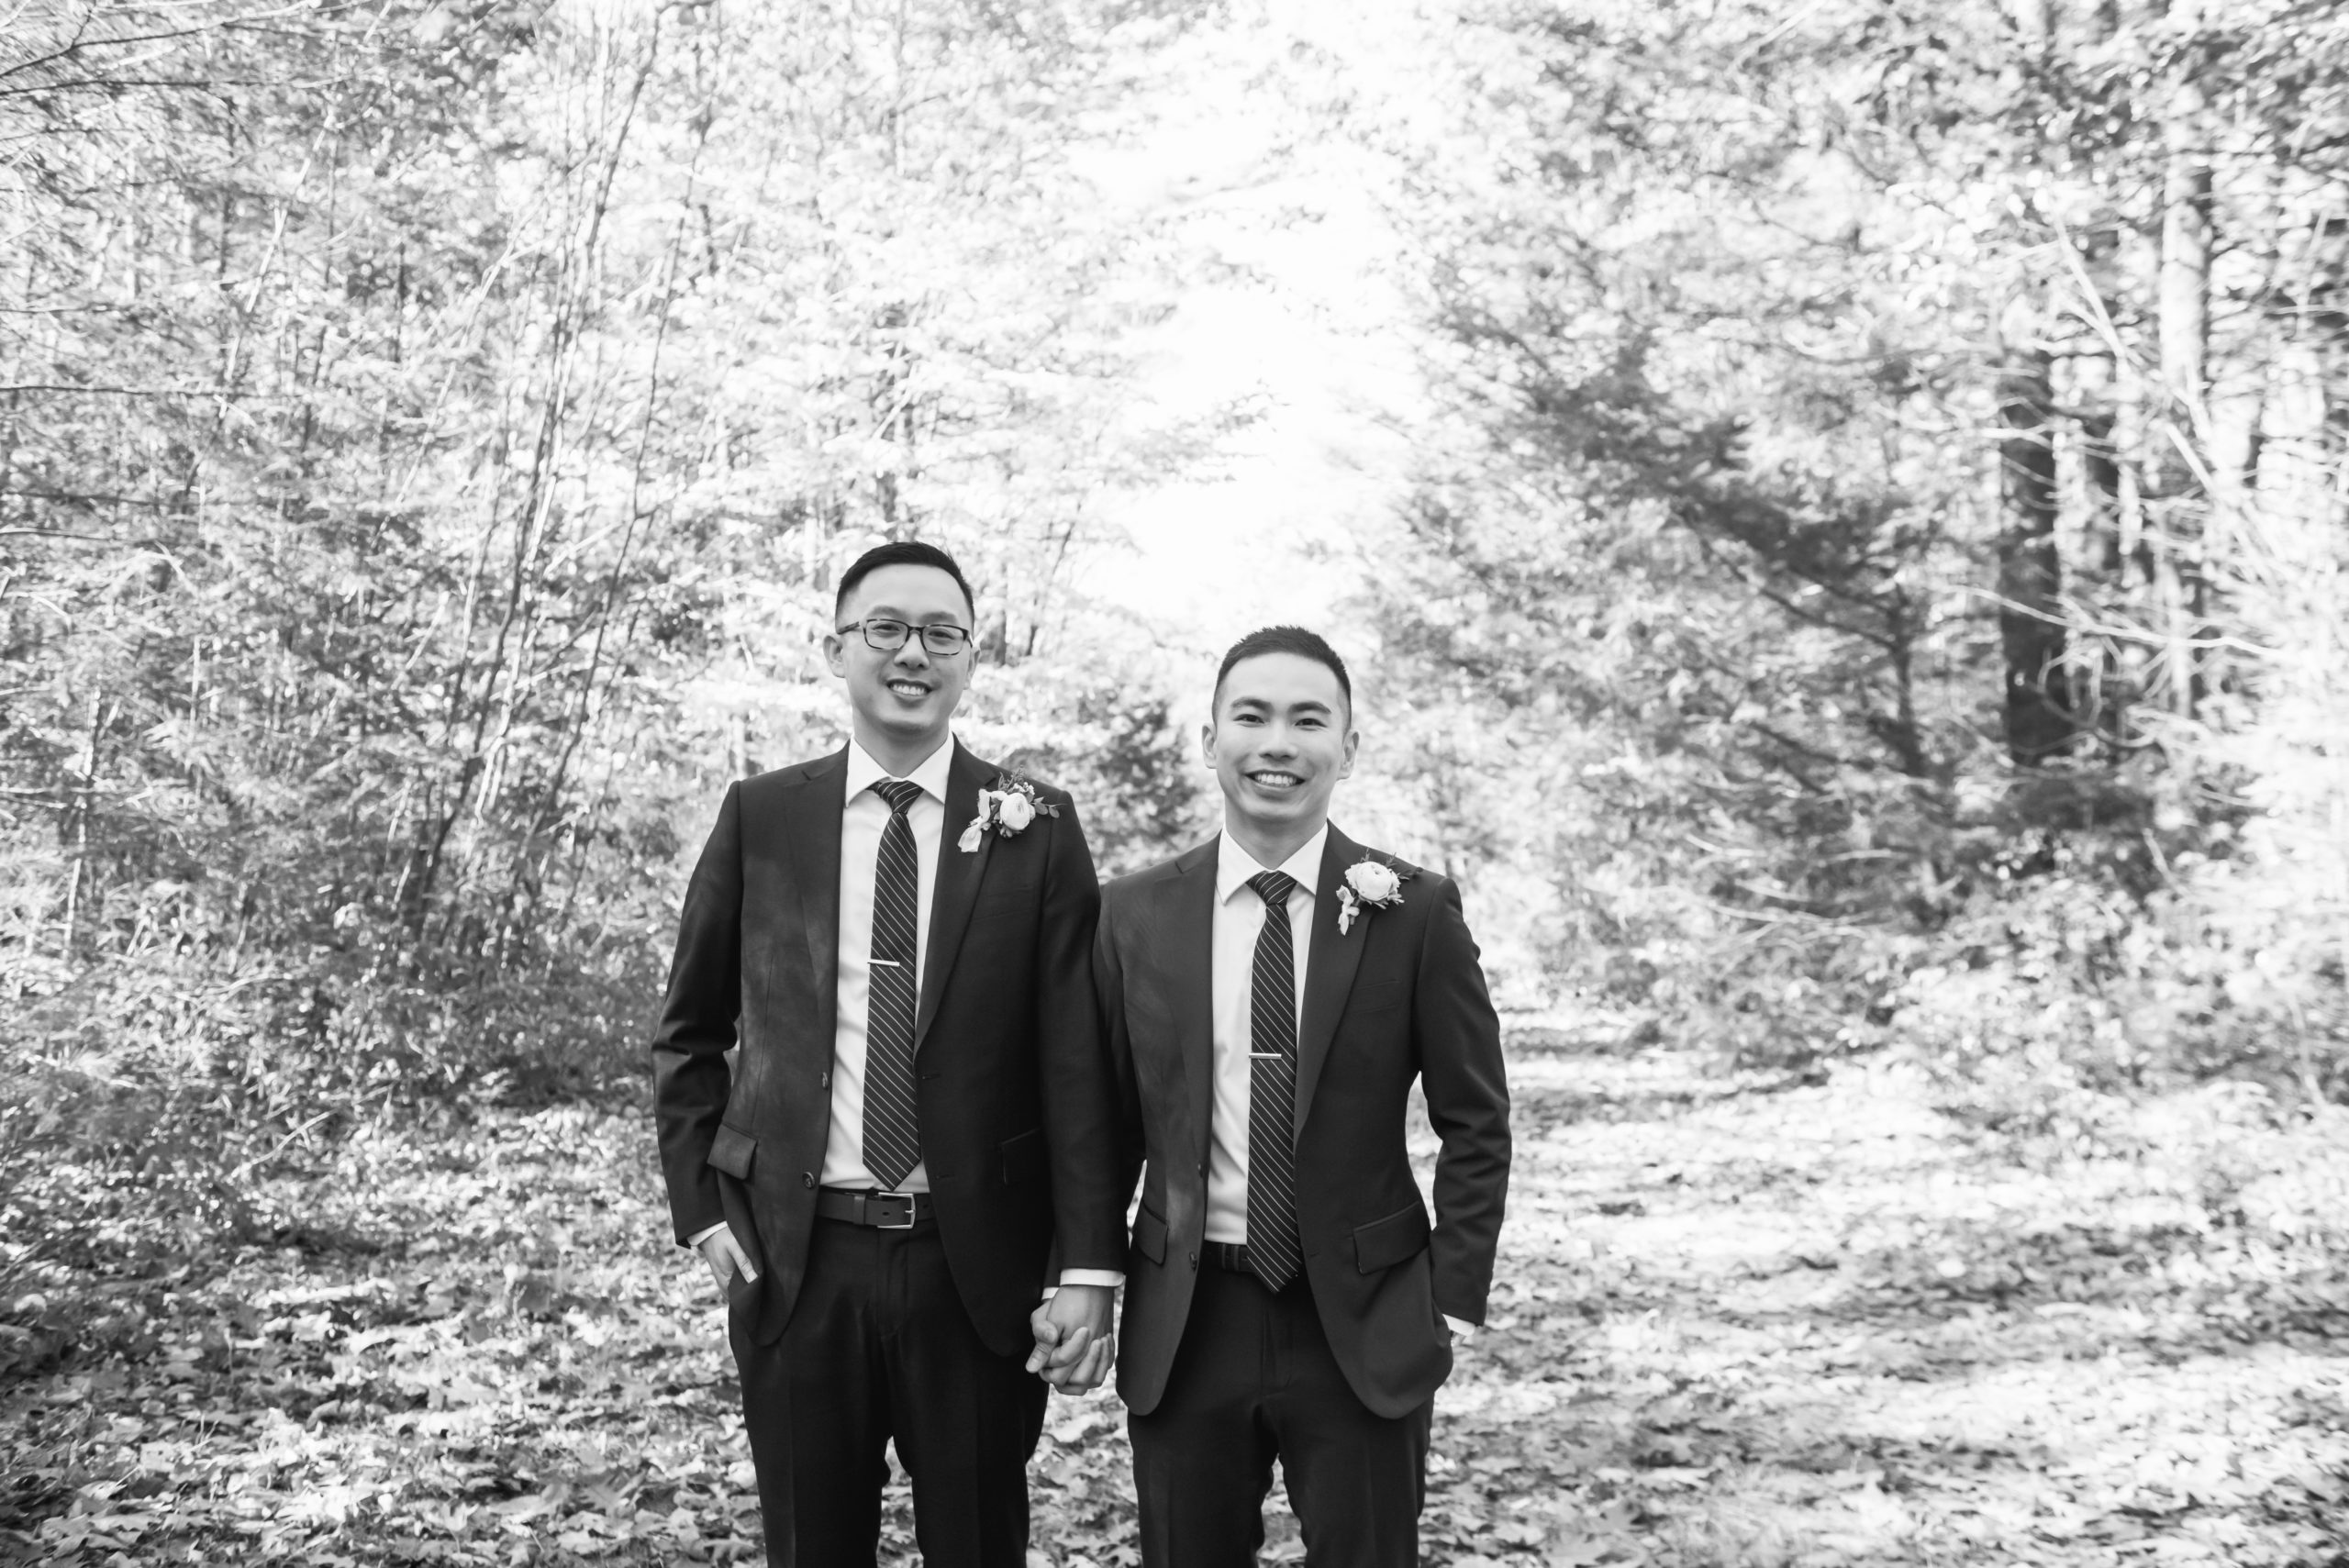 Black and white photo of two grooms standing side by side, holding hands. They are both looking straight to camera and are smiling. They are on a leaf-covered trail and there are trees in the background.